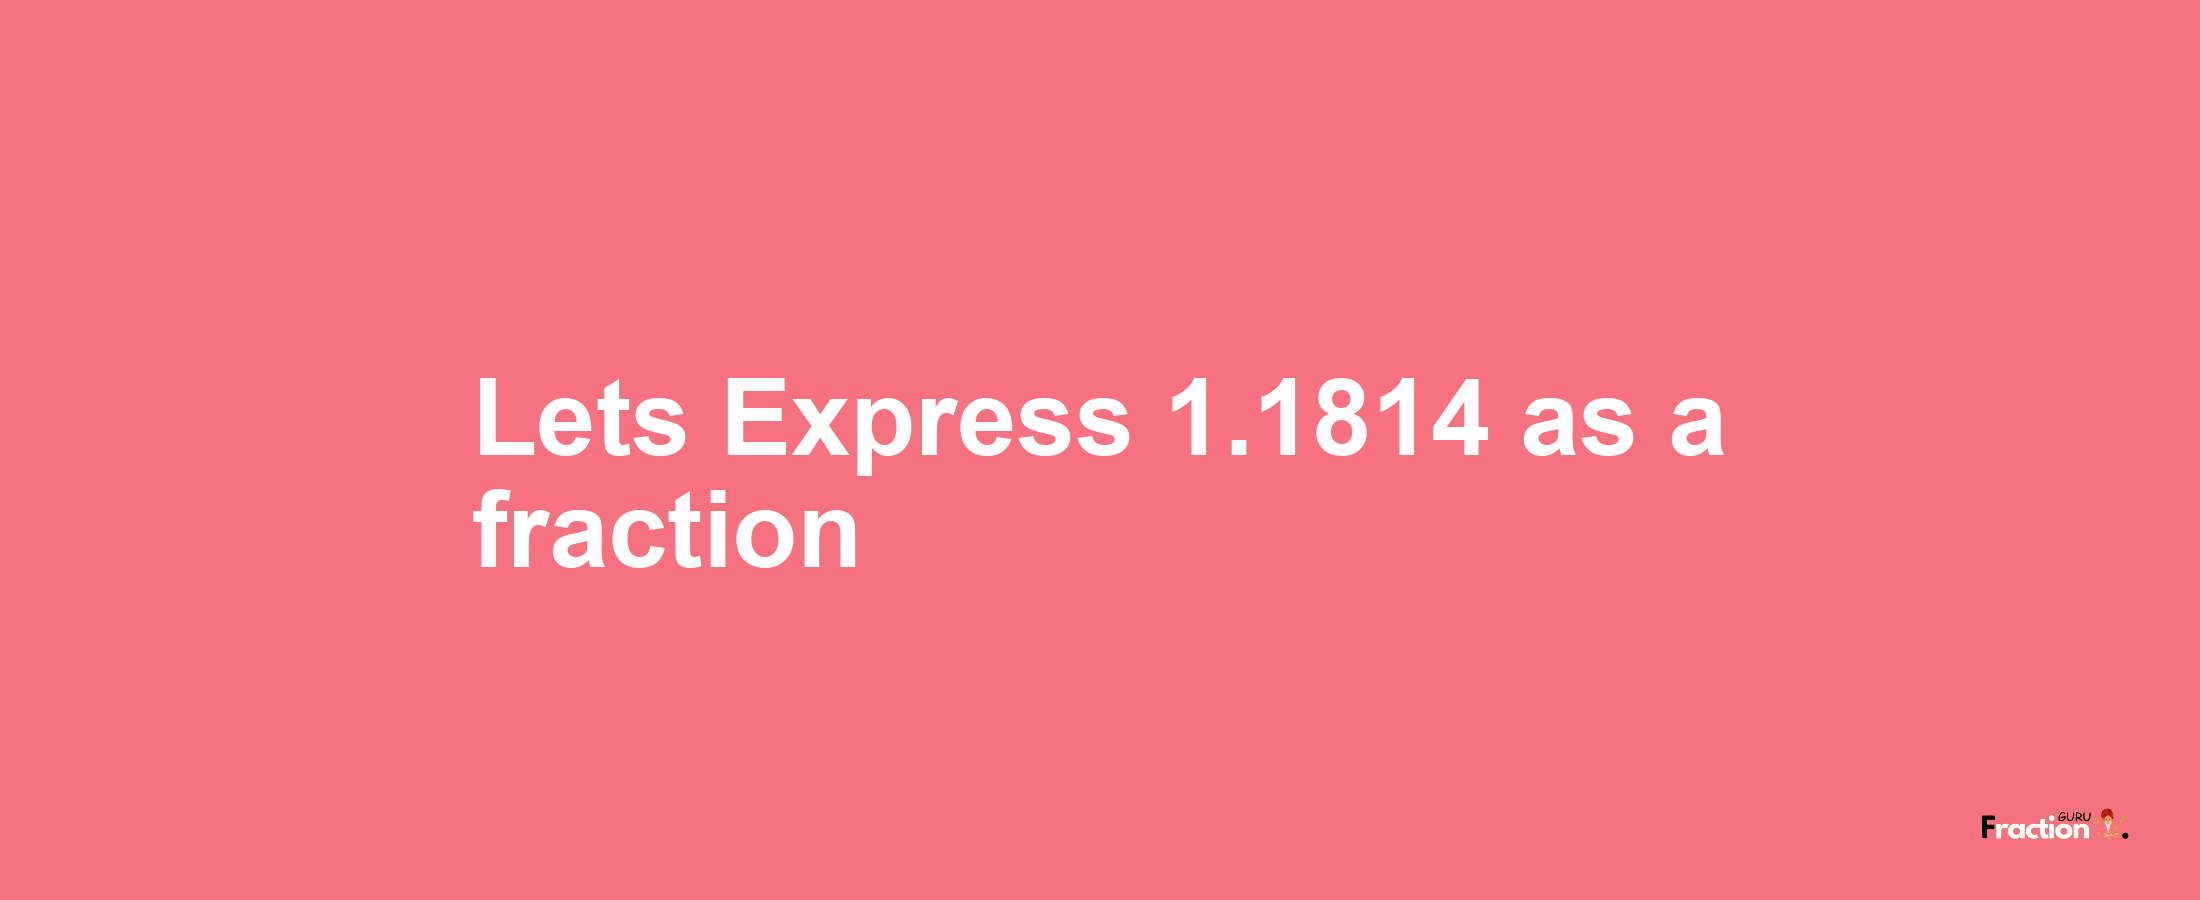 Lets Express 1.1814 as afraction